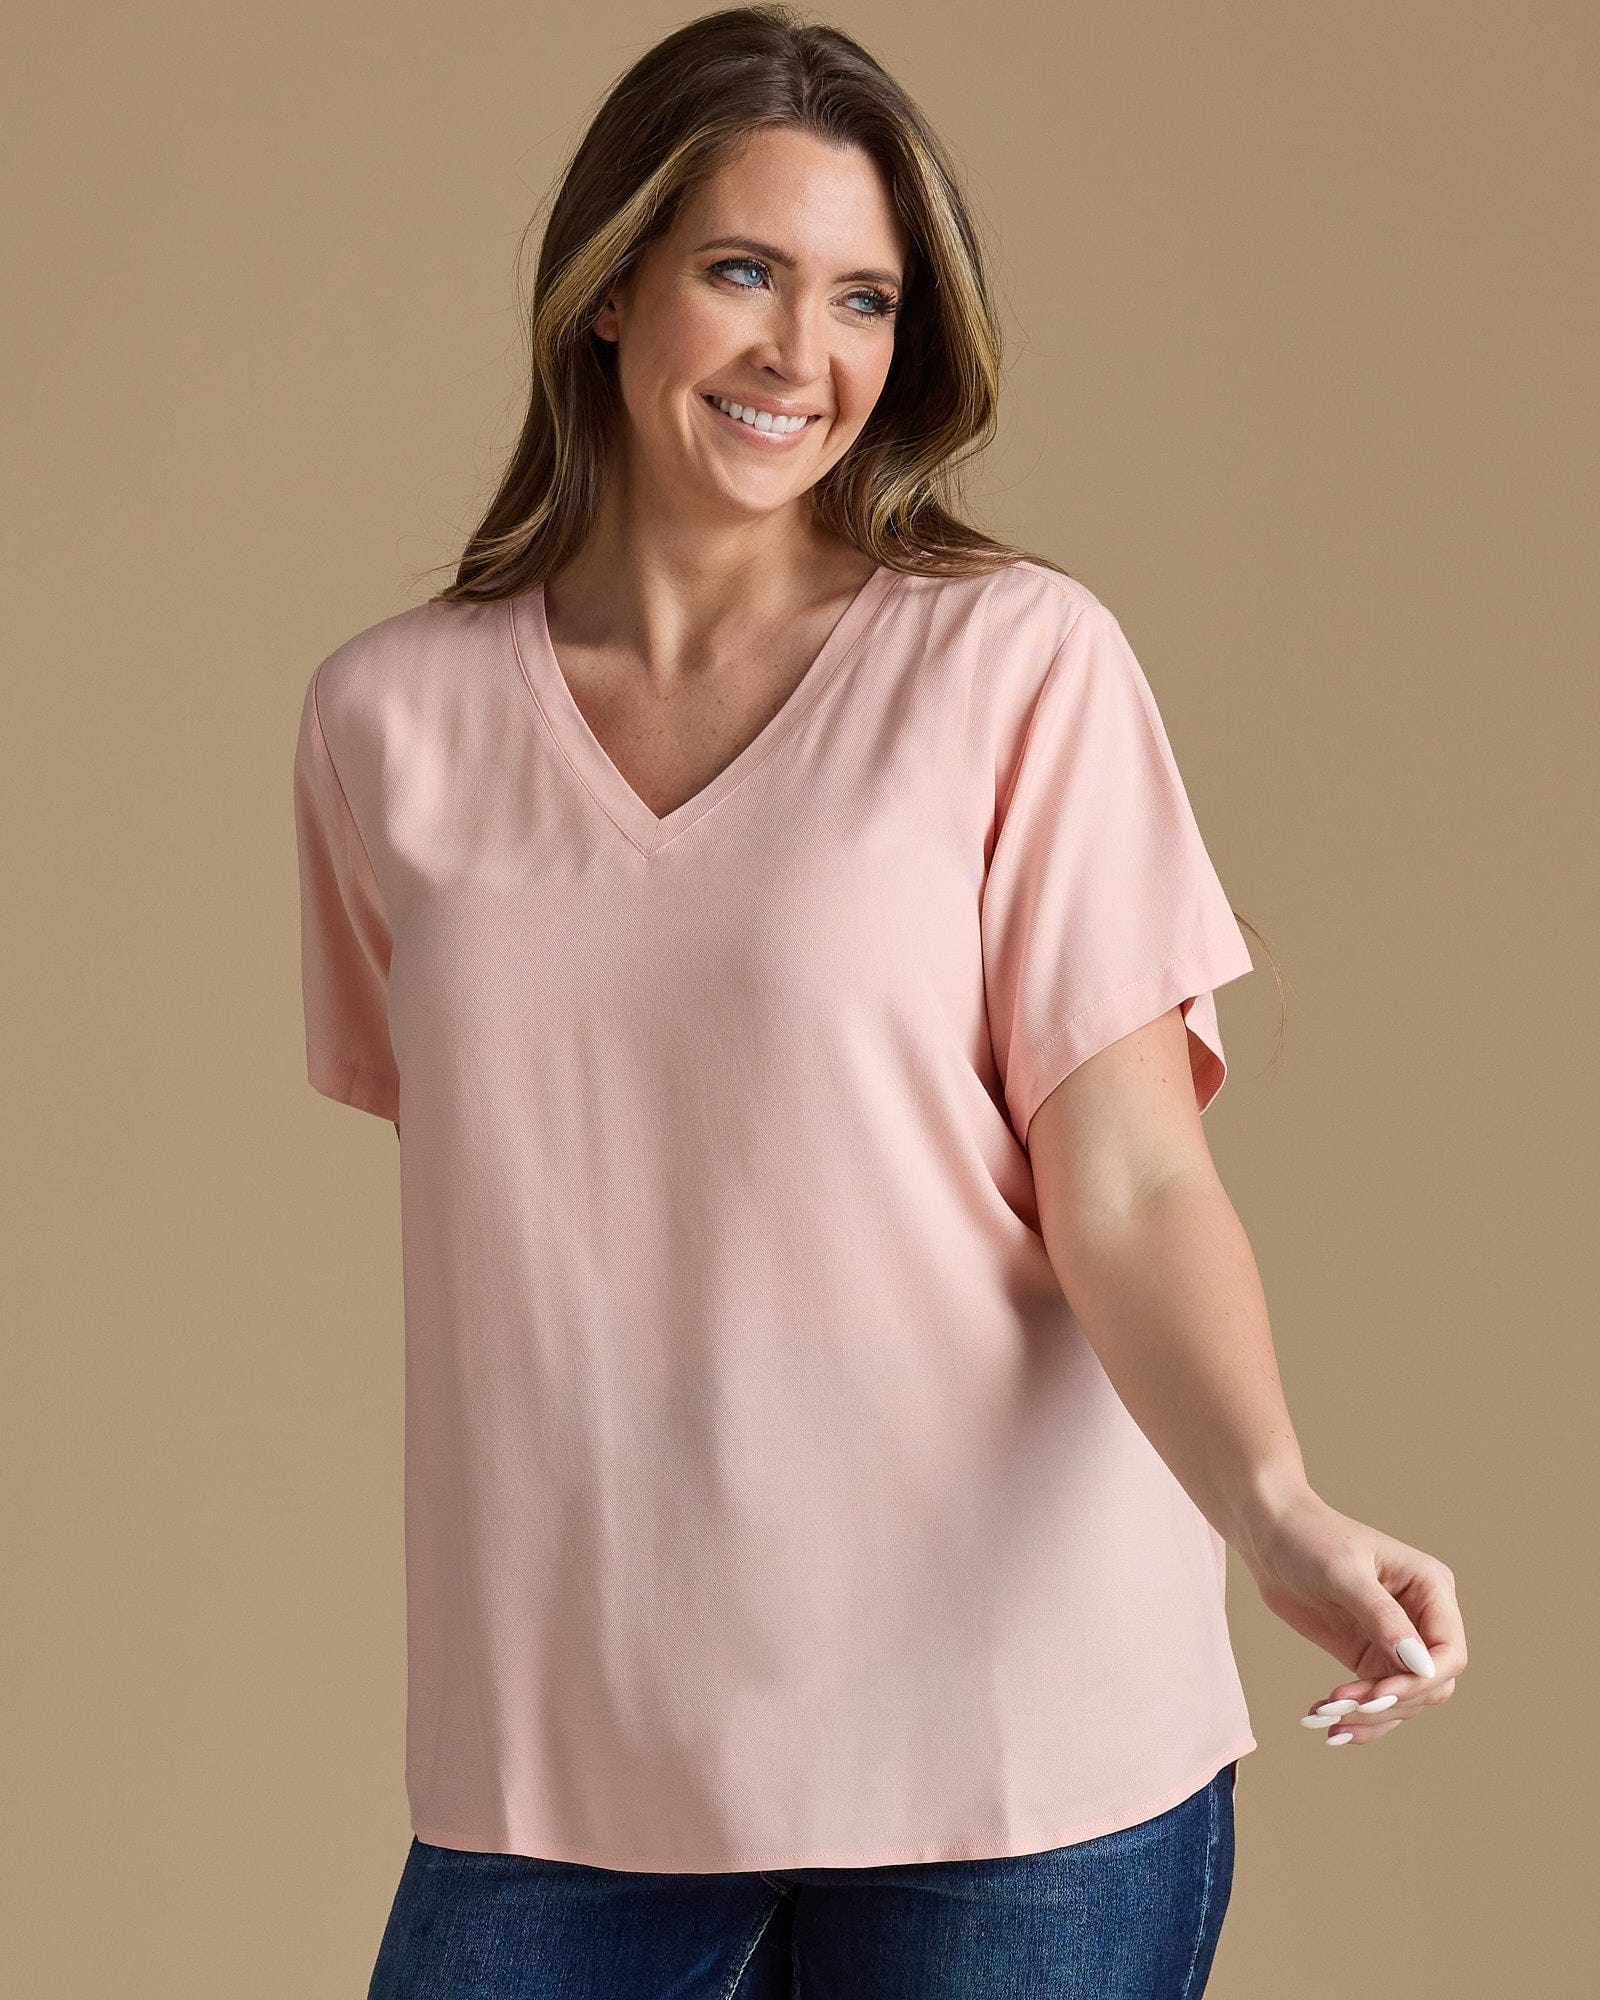 Woman in a pink blouse with short sleeves